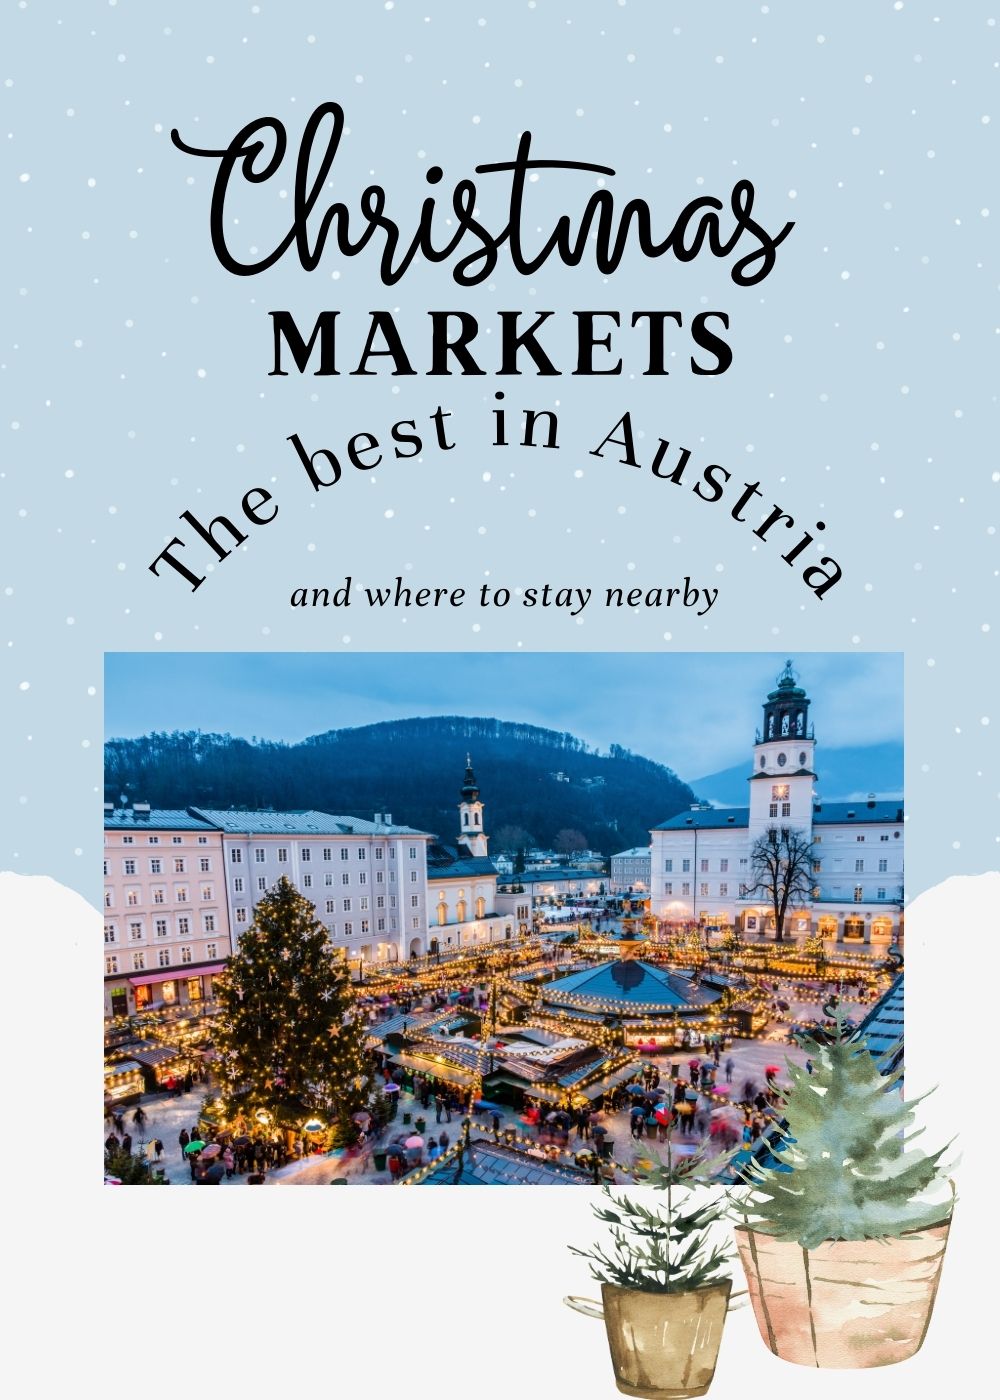 The best Christmas markets in Austria and where to stay nearby